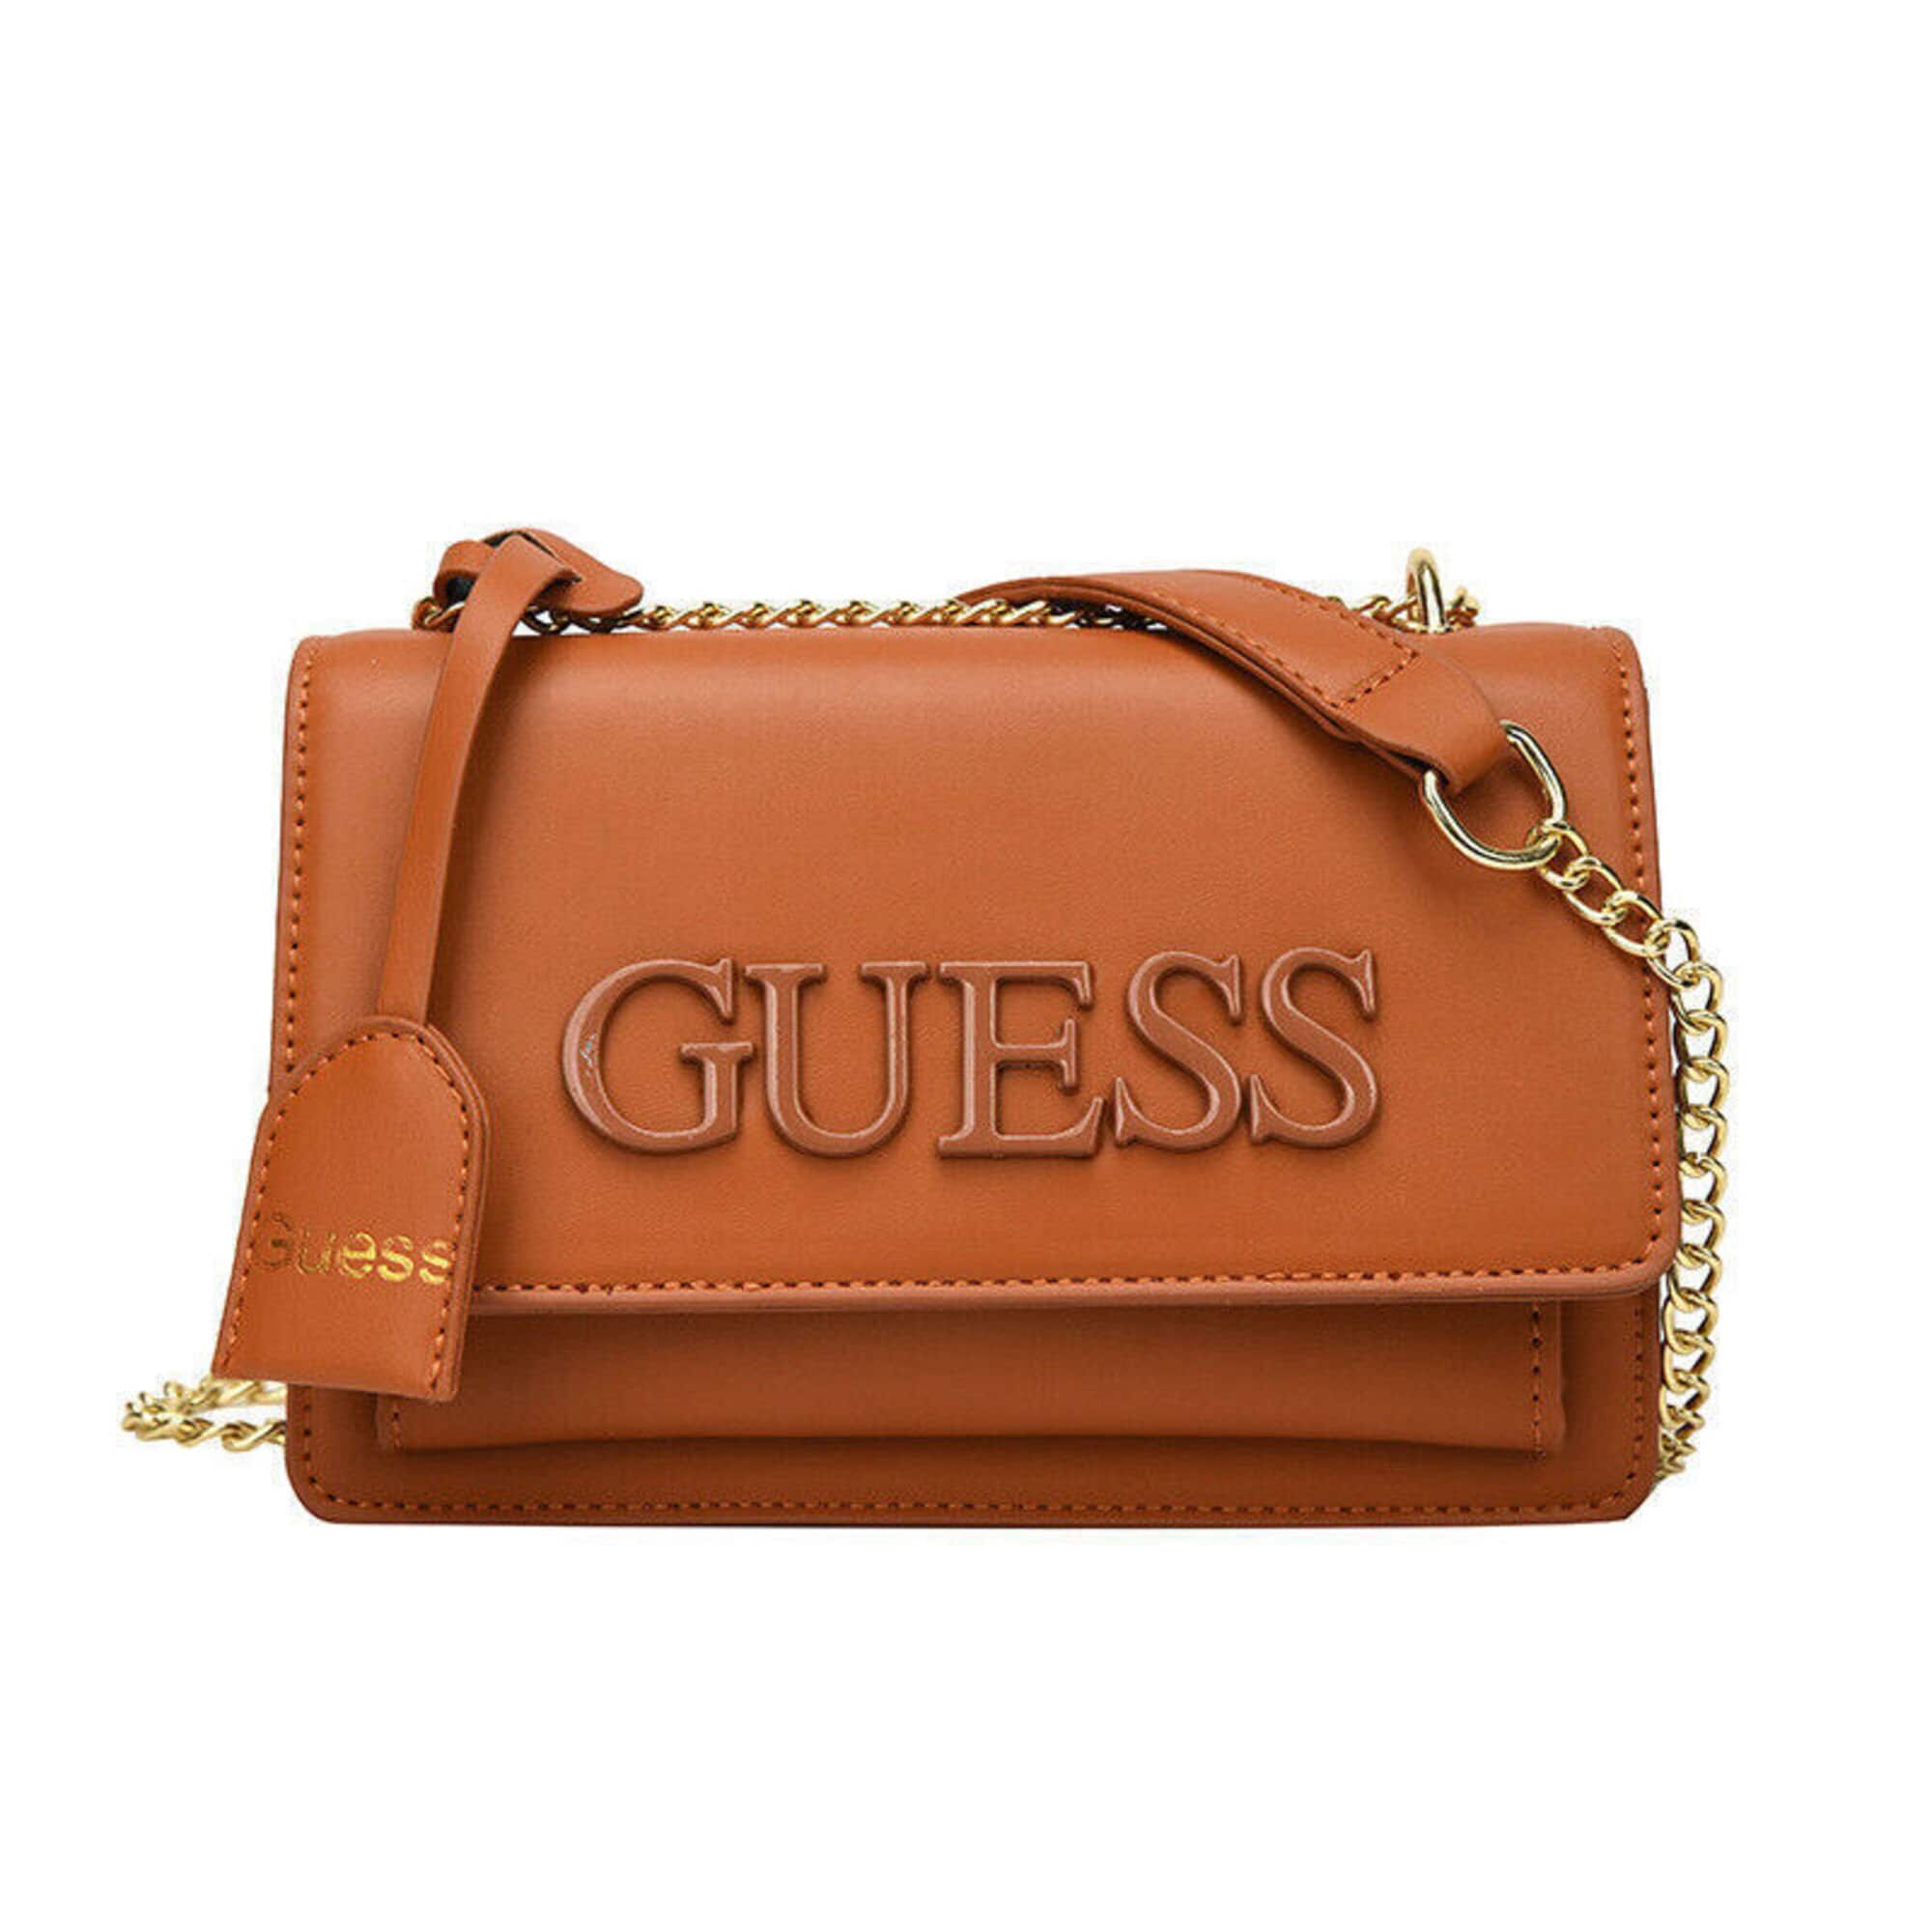 Guess - Authenticated Handbag - Synthetic Pink Plain for Women, Never Worn